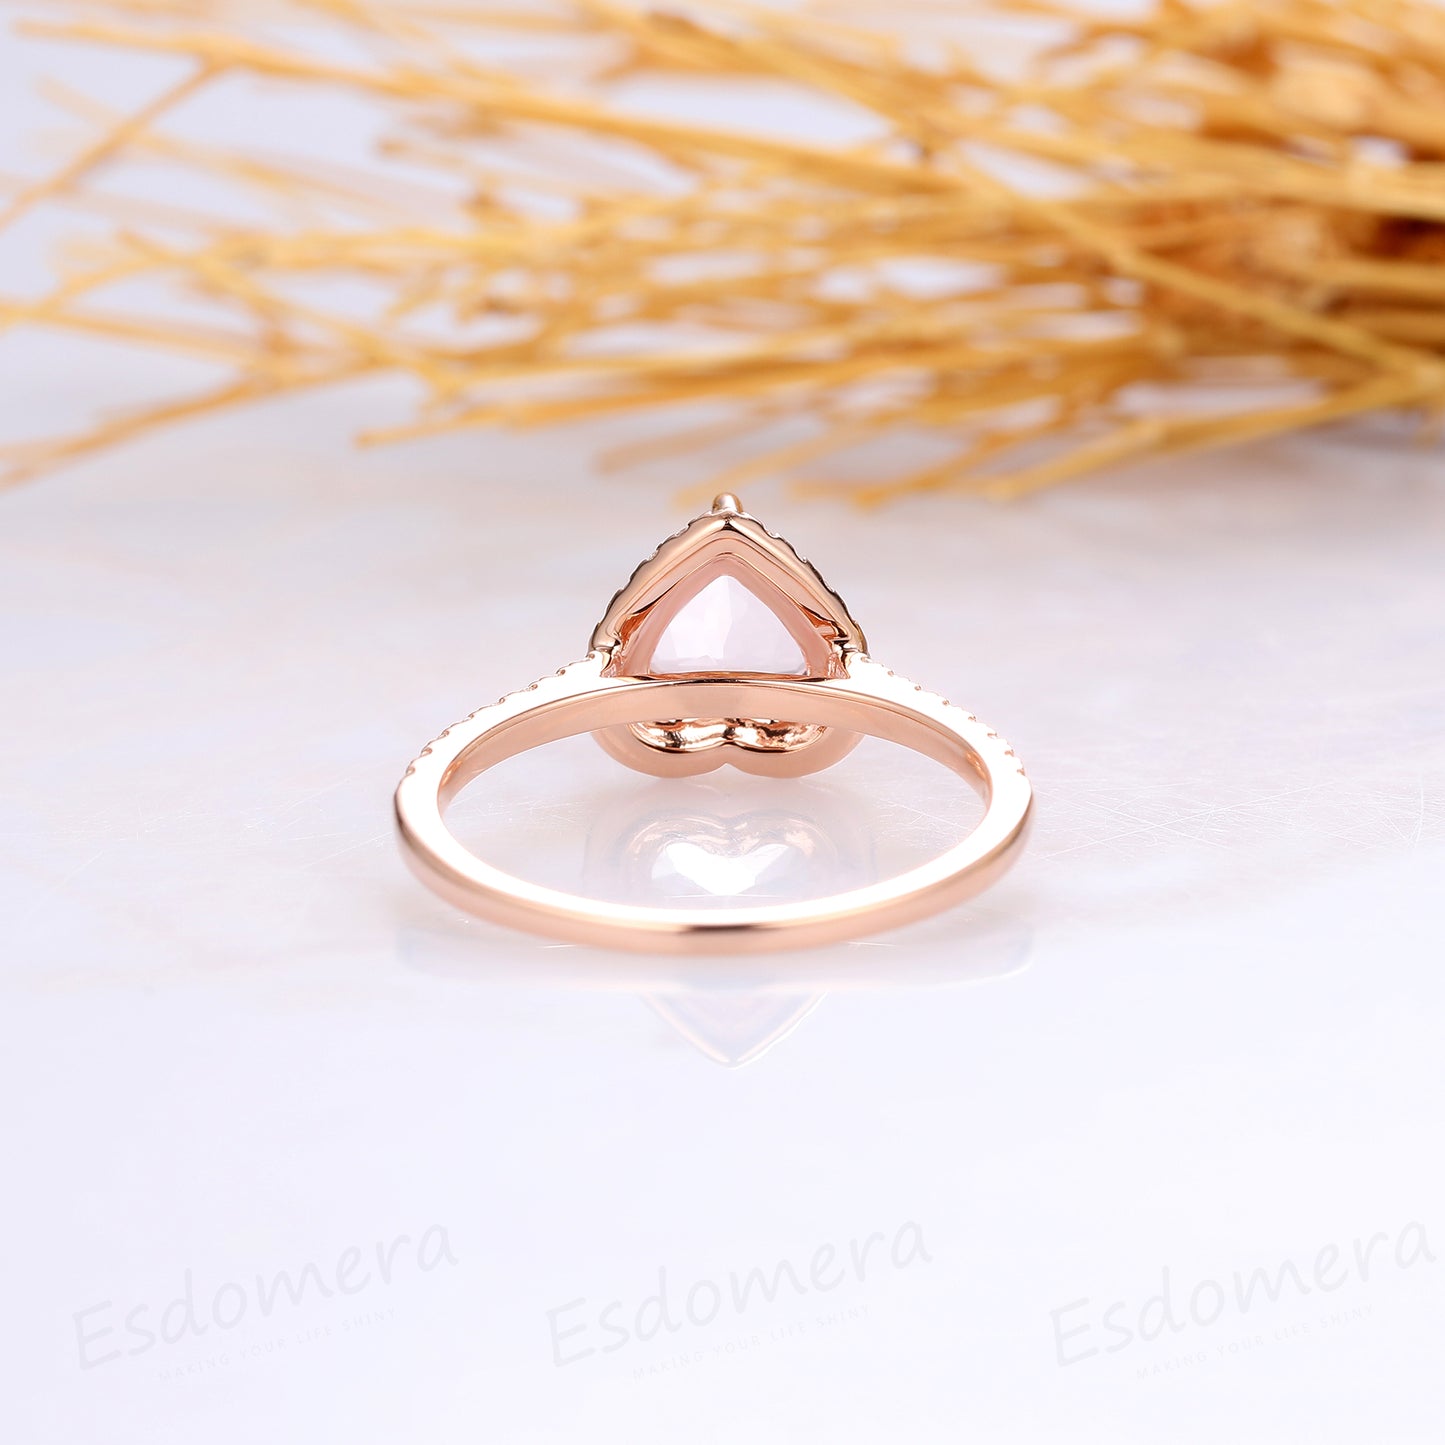 Heart Shape 1CT Morganite Engagement Ring, Halo Pave Accents Ring, 14k Rose Gold, Wedding Ring